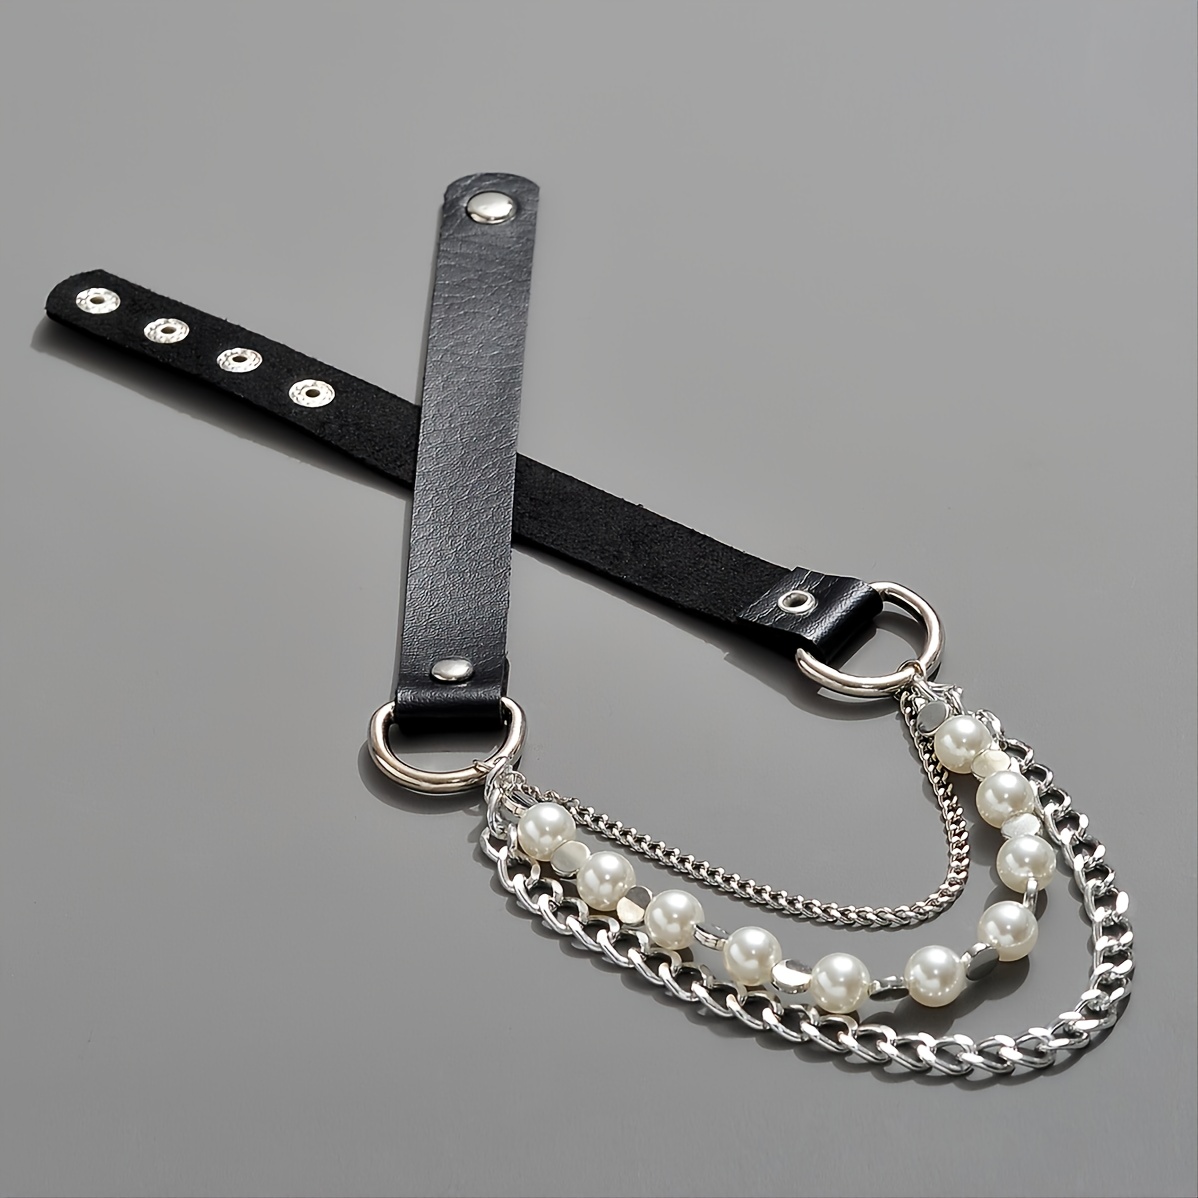 Fashion Women Men Cool Punk Goth Metal Spike Studded Link Leather